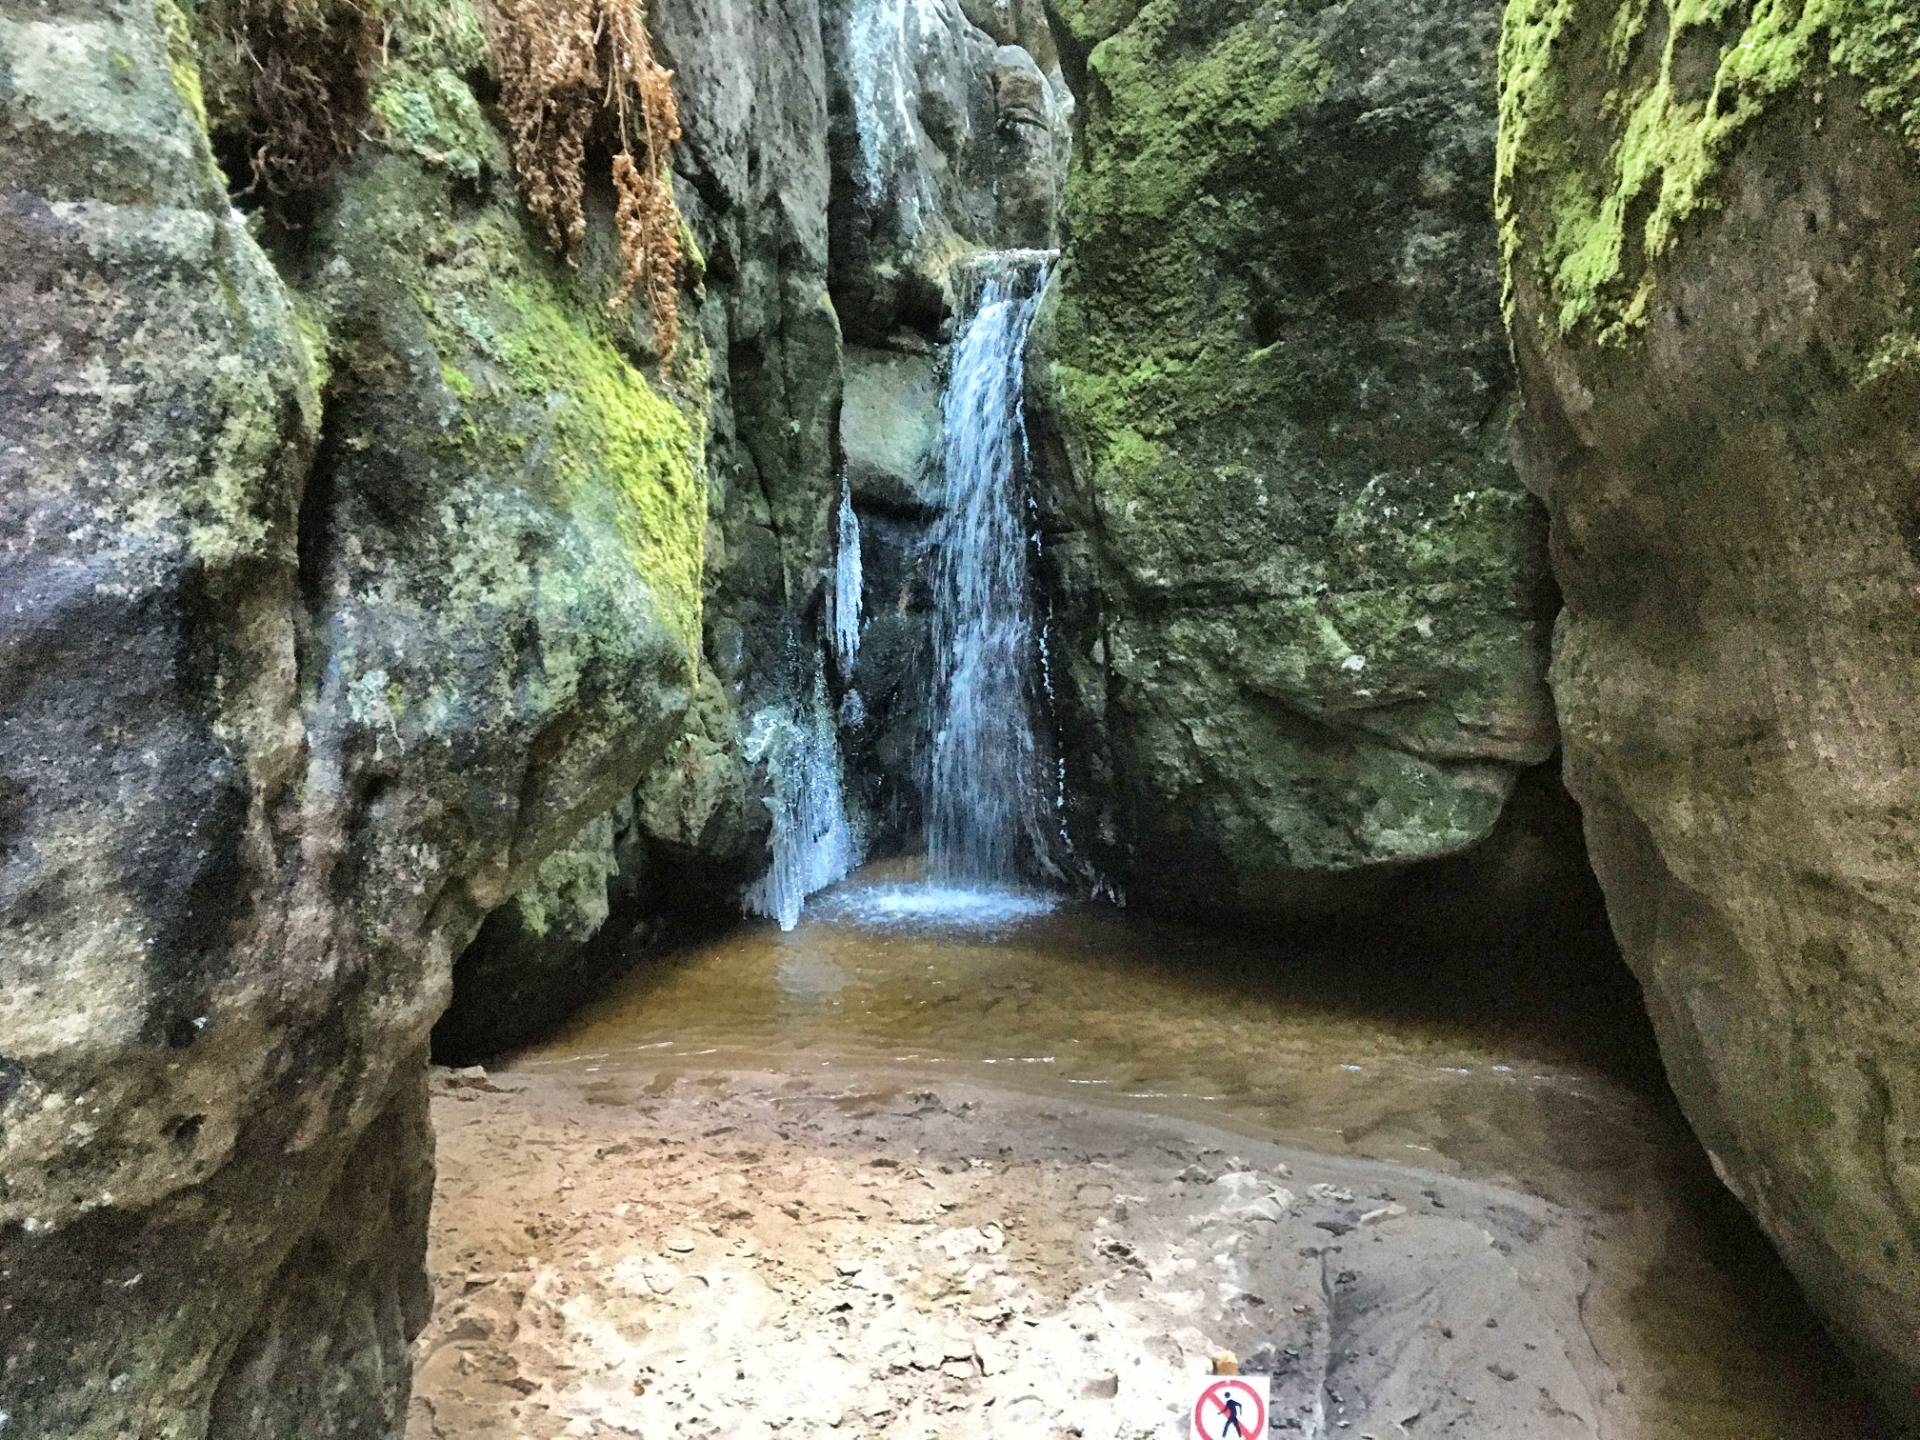 One of the waterfalls